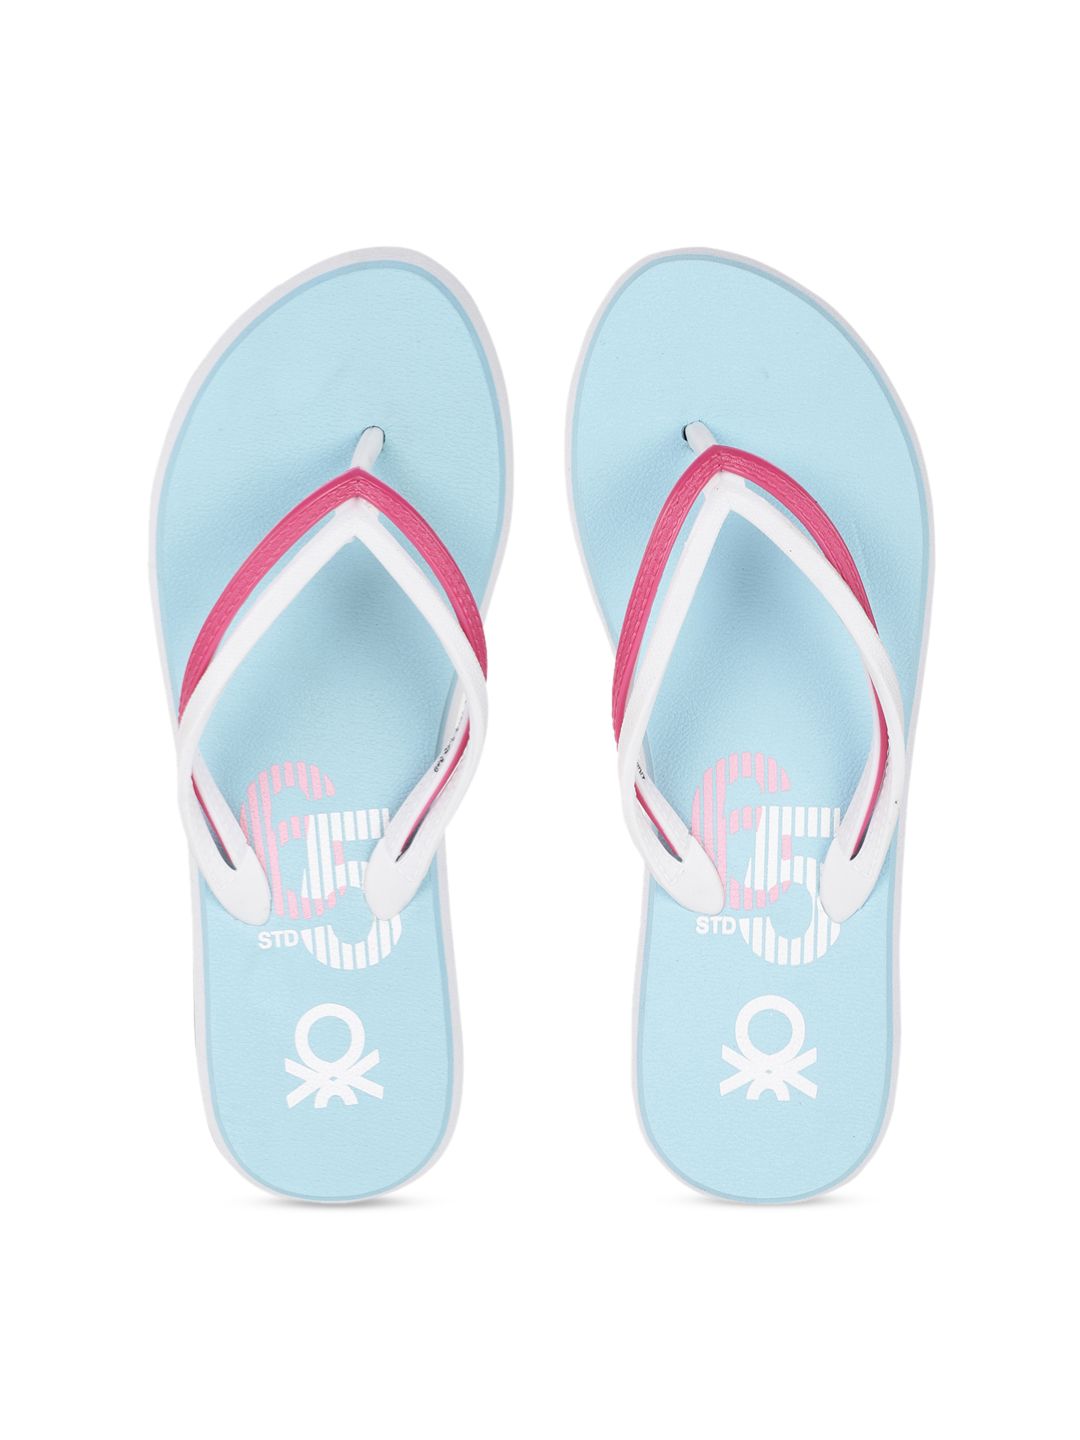 United Colors of Benetton Women Blue Printed Thong Flip-Flops Price in India